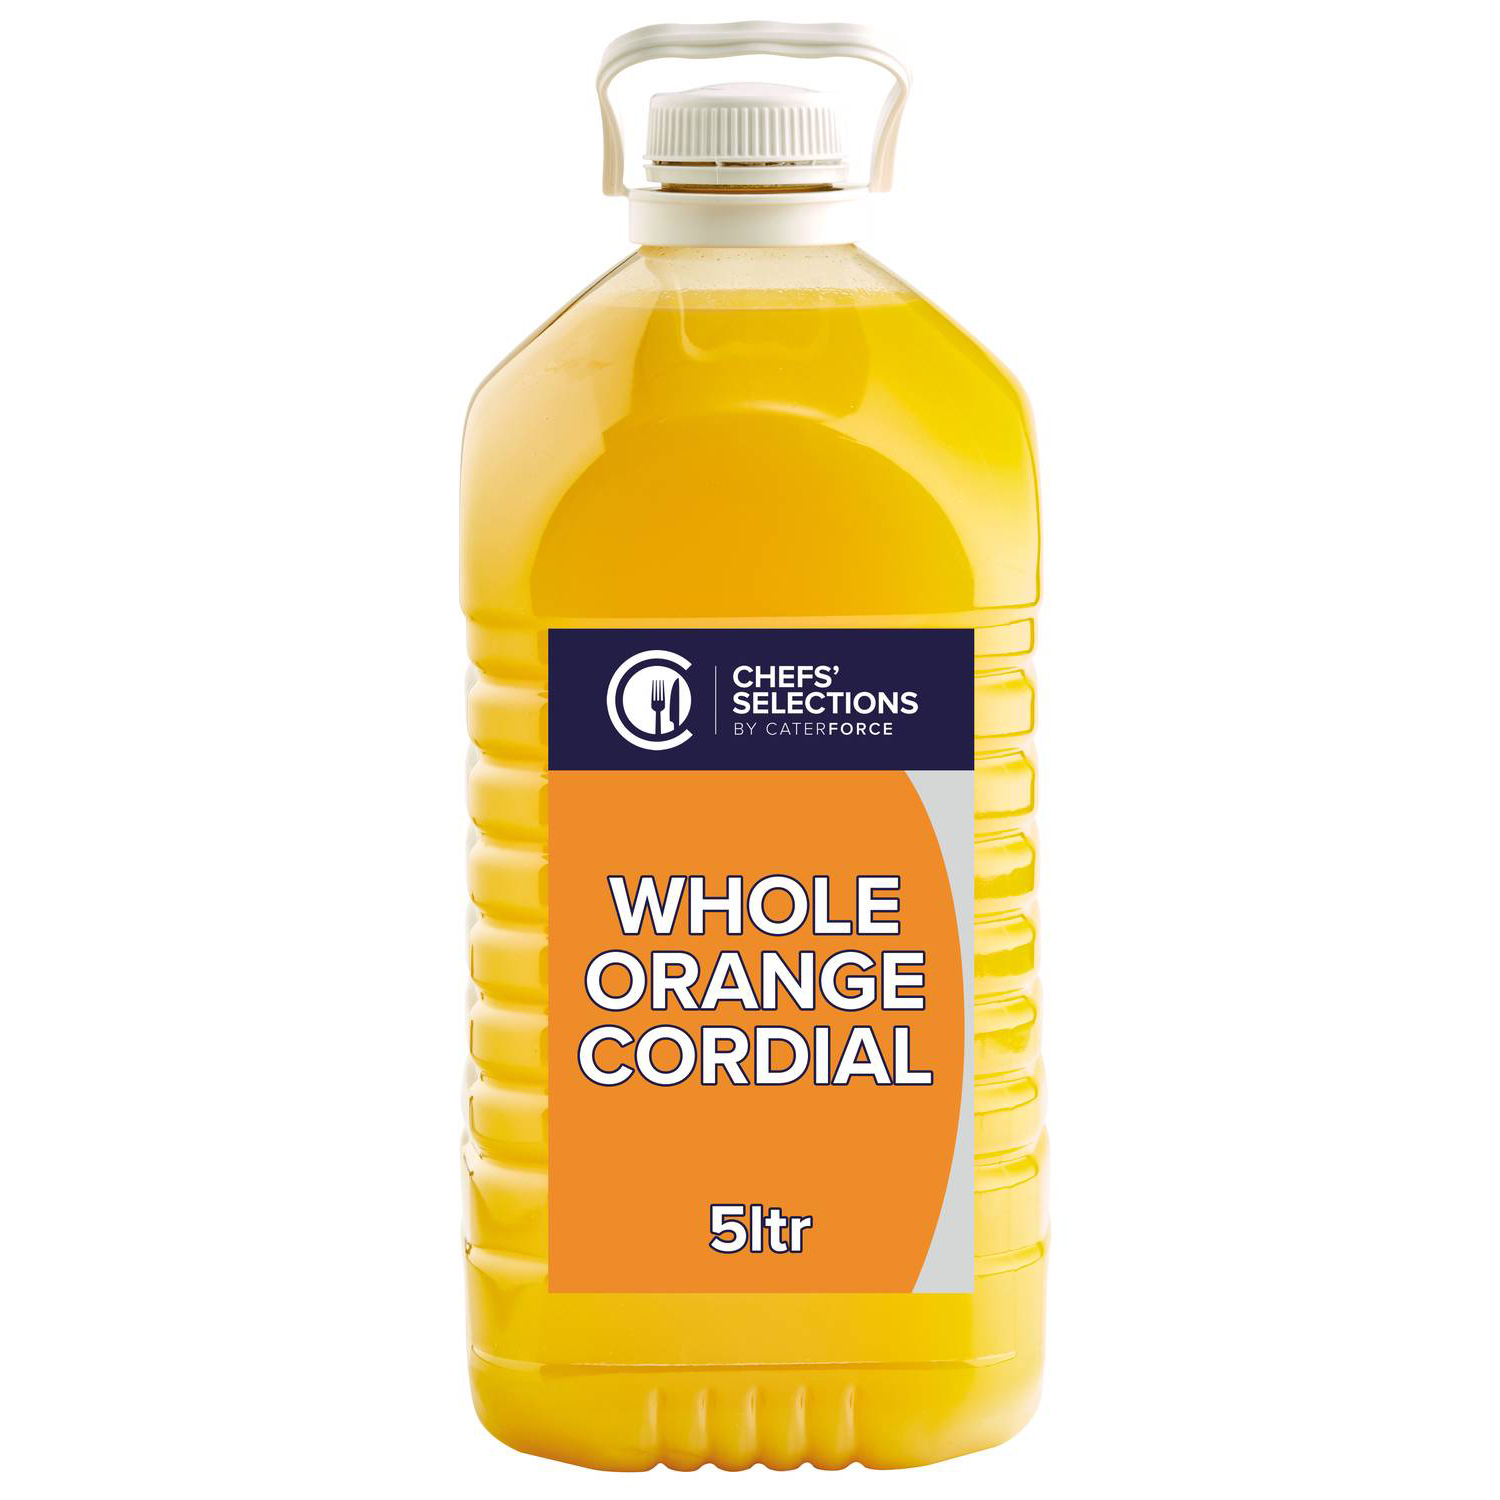 Chefs’ Selections Whole Orange Cordial No Added Sugar (2 x 5L)